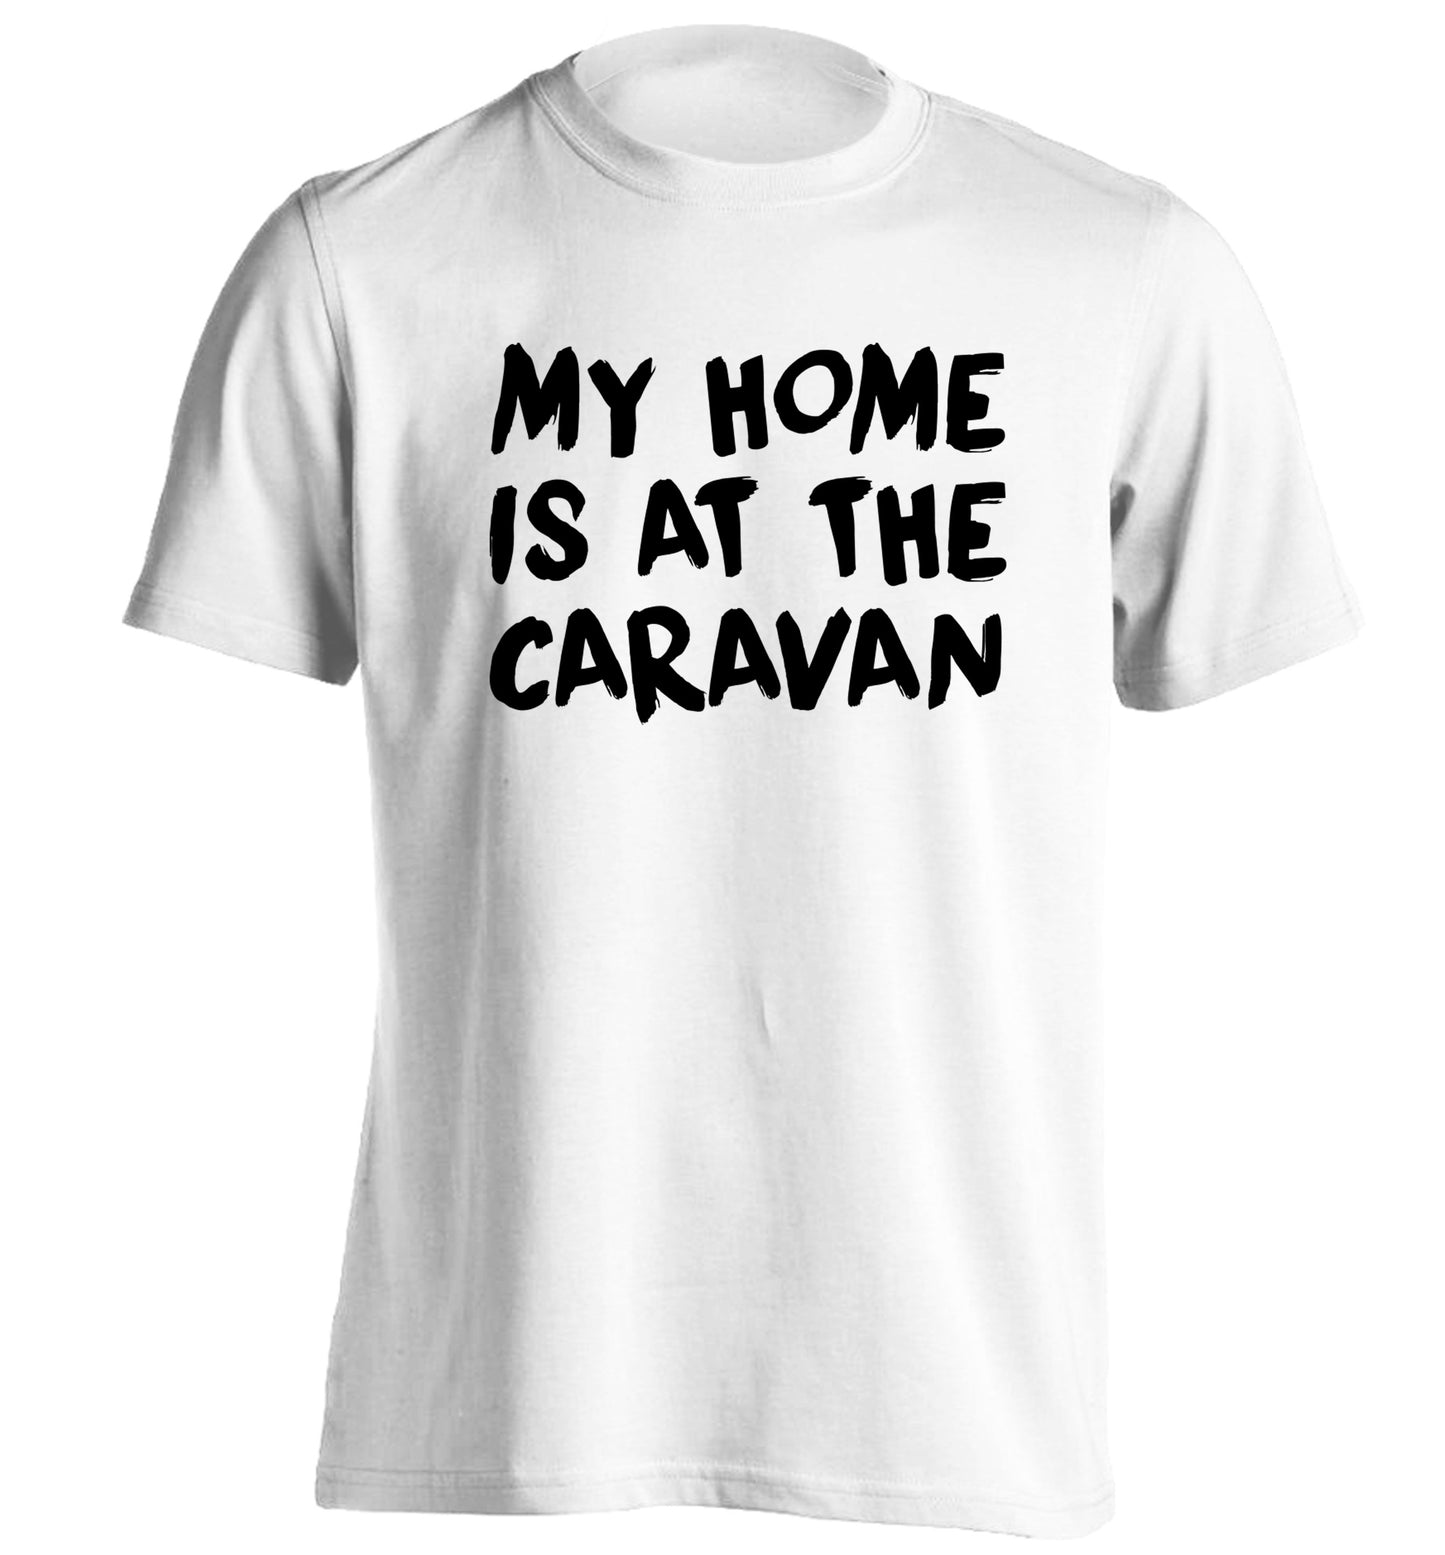 My home is at the caravan adults unisex white Tshirt 2XL